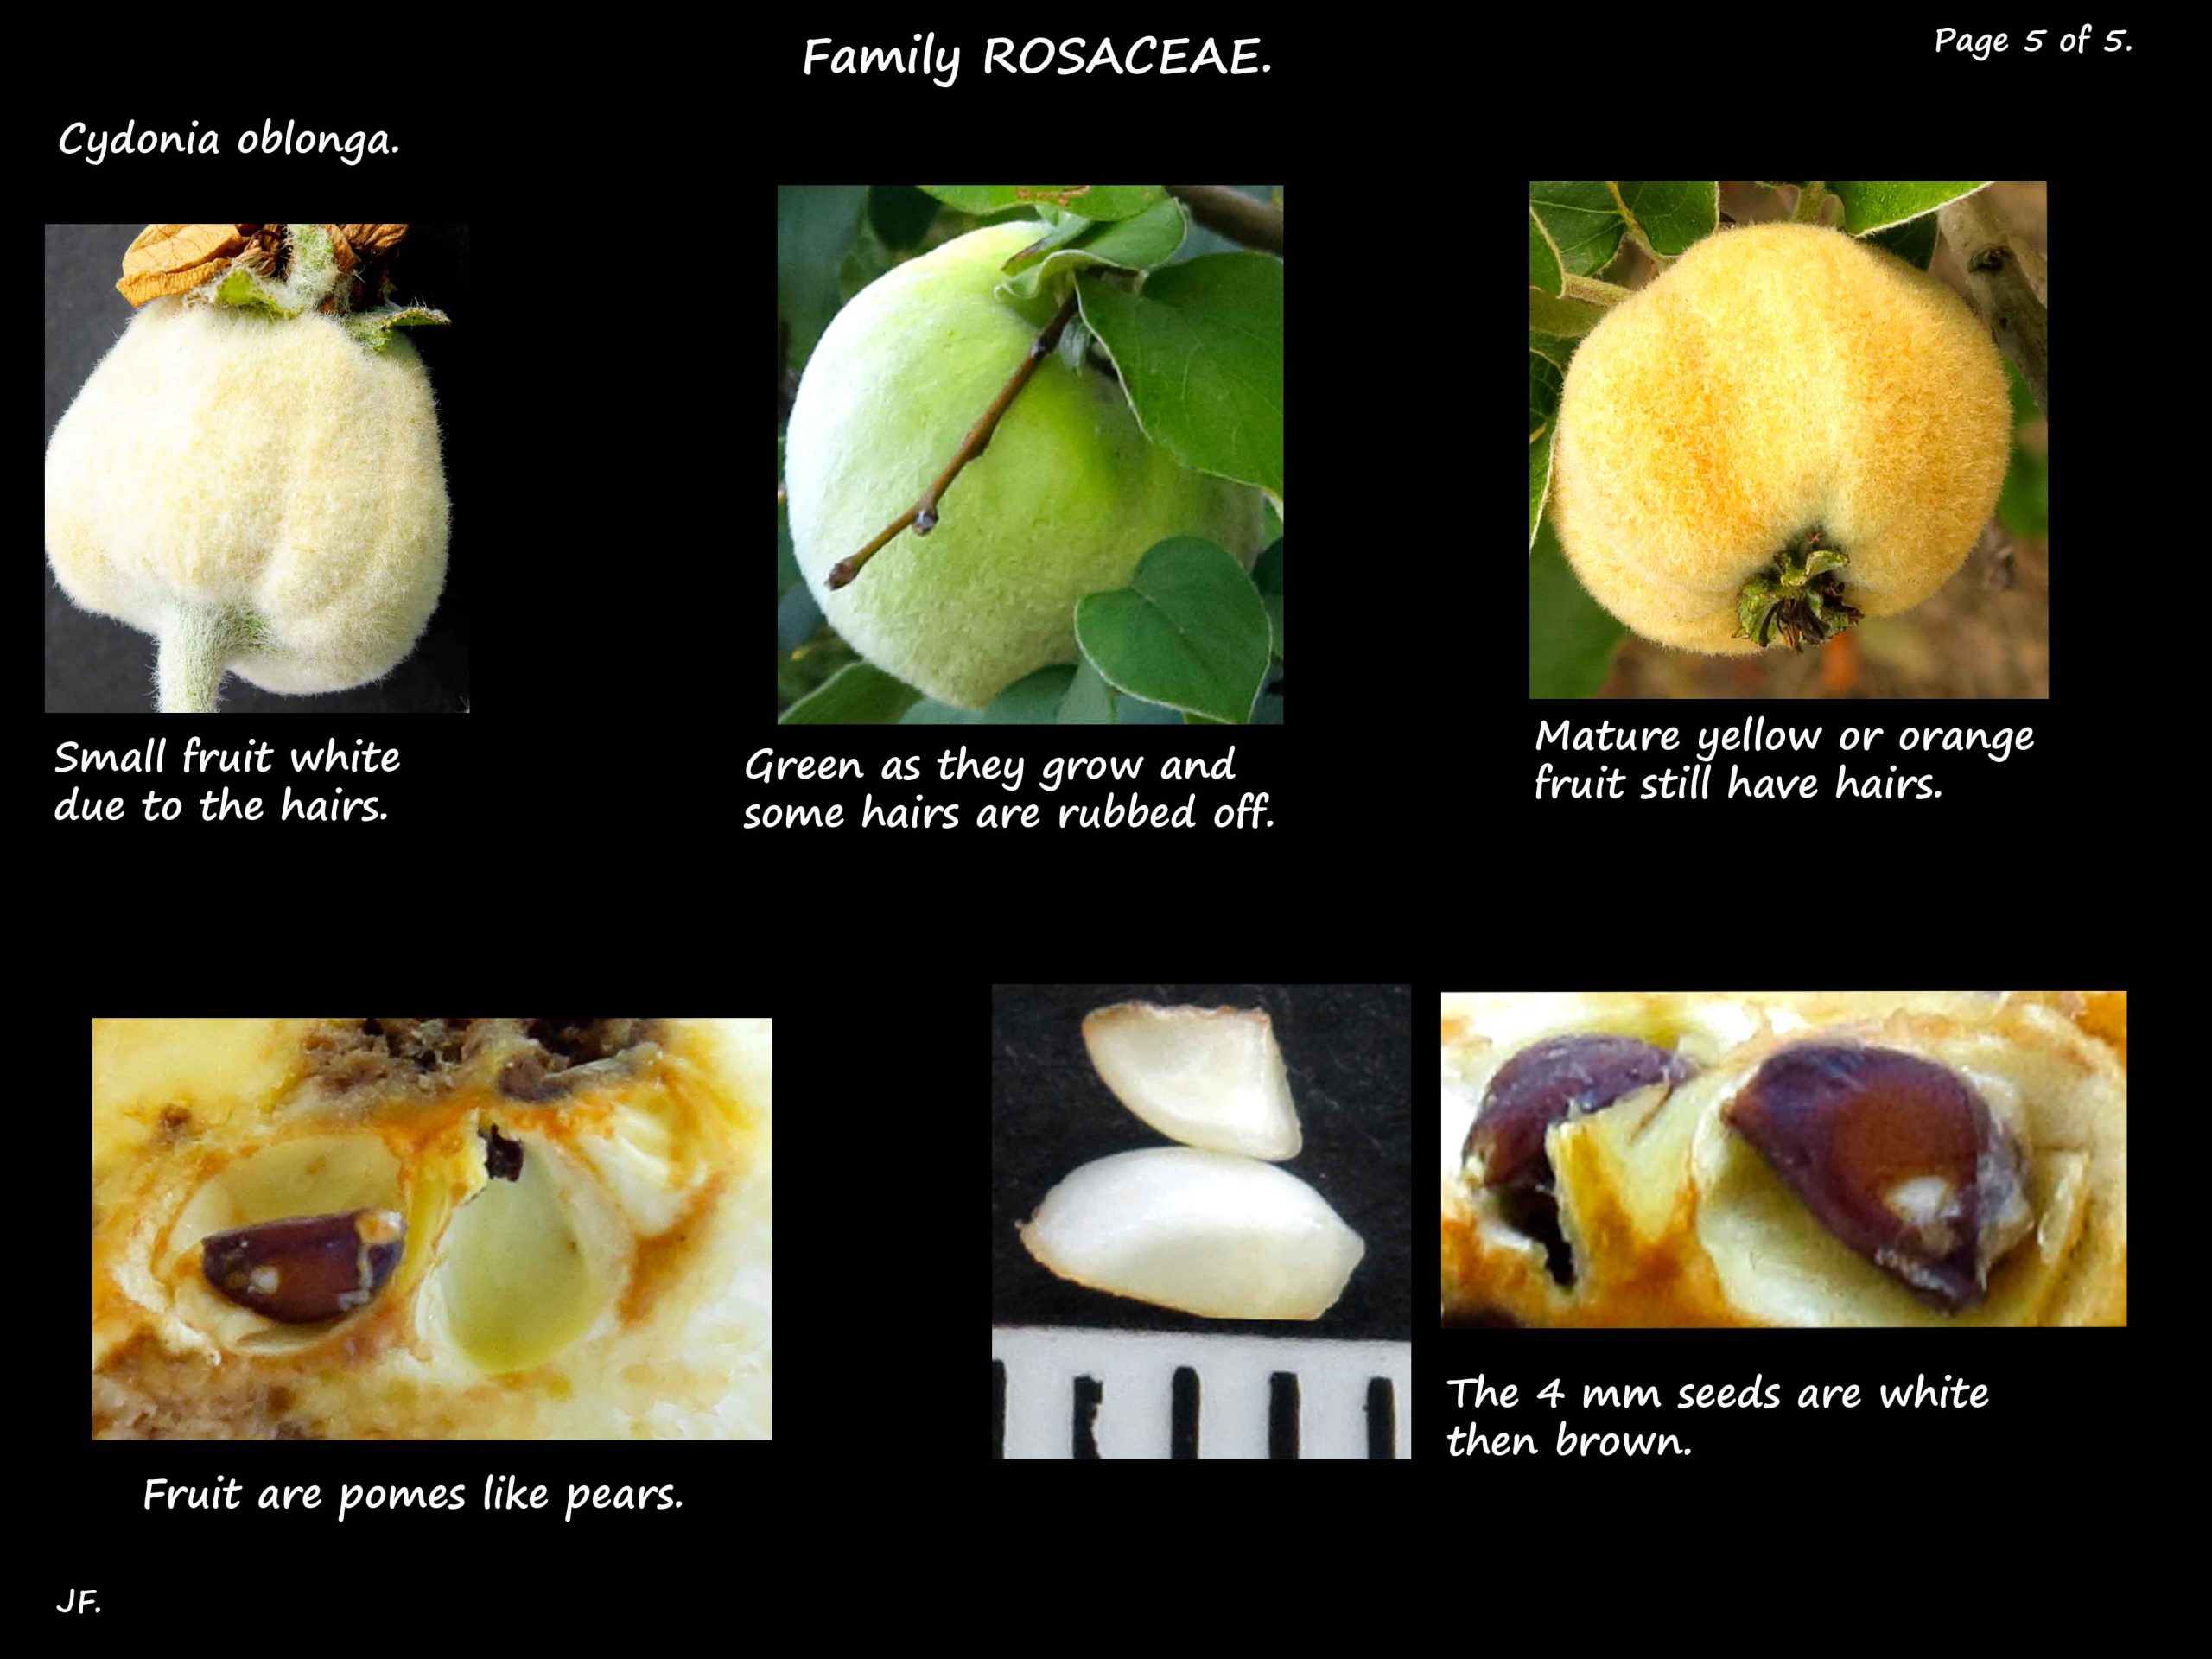 5 Cydonia fruit are quinces